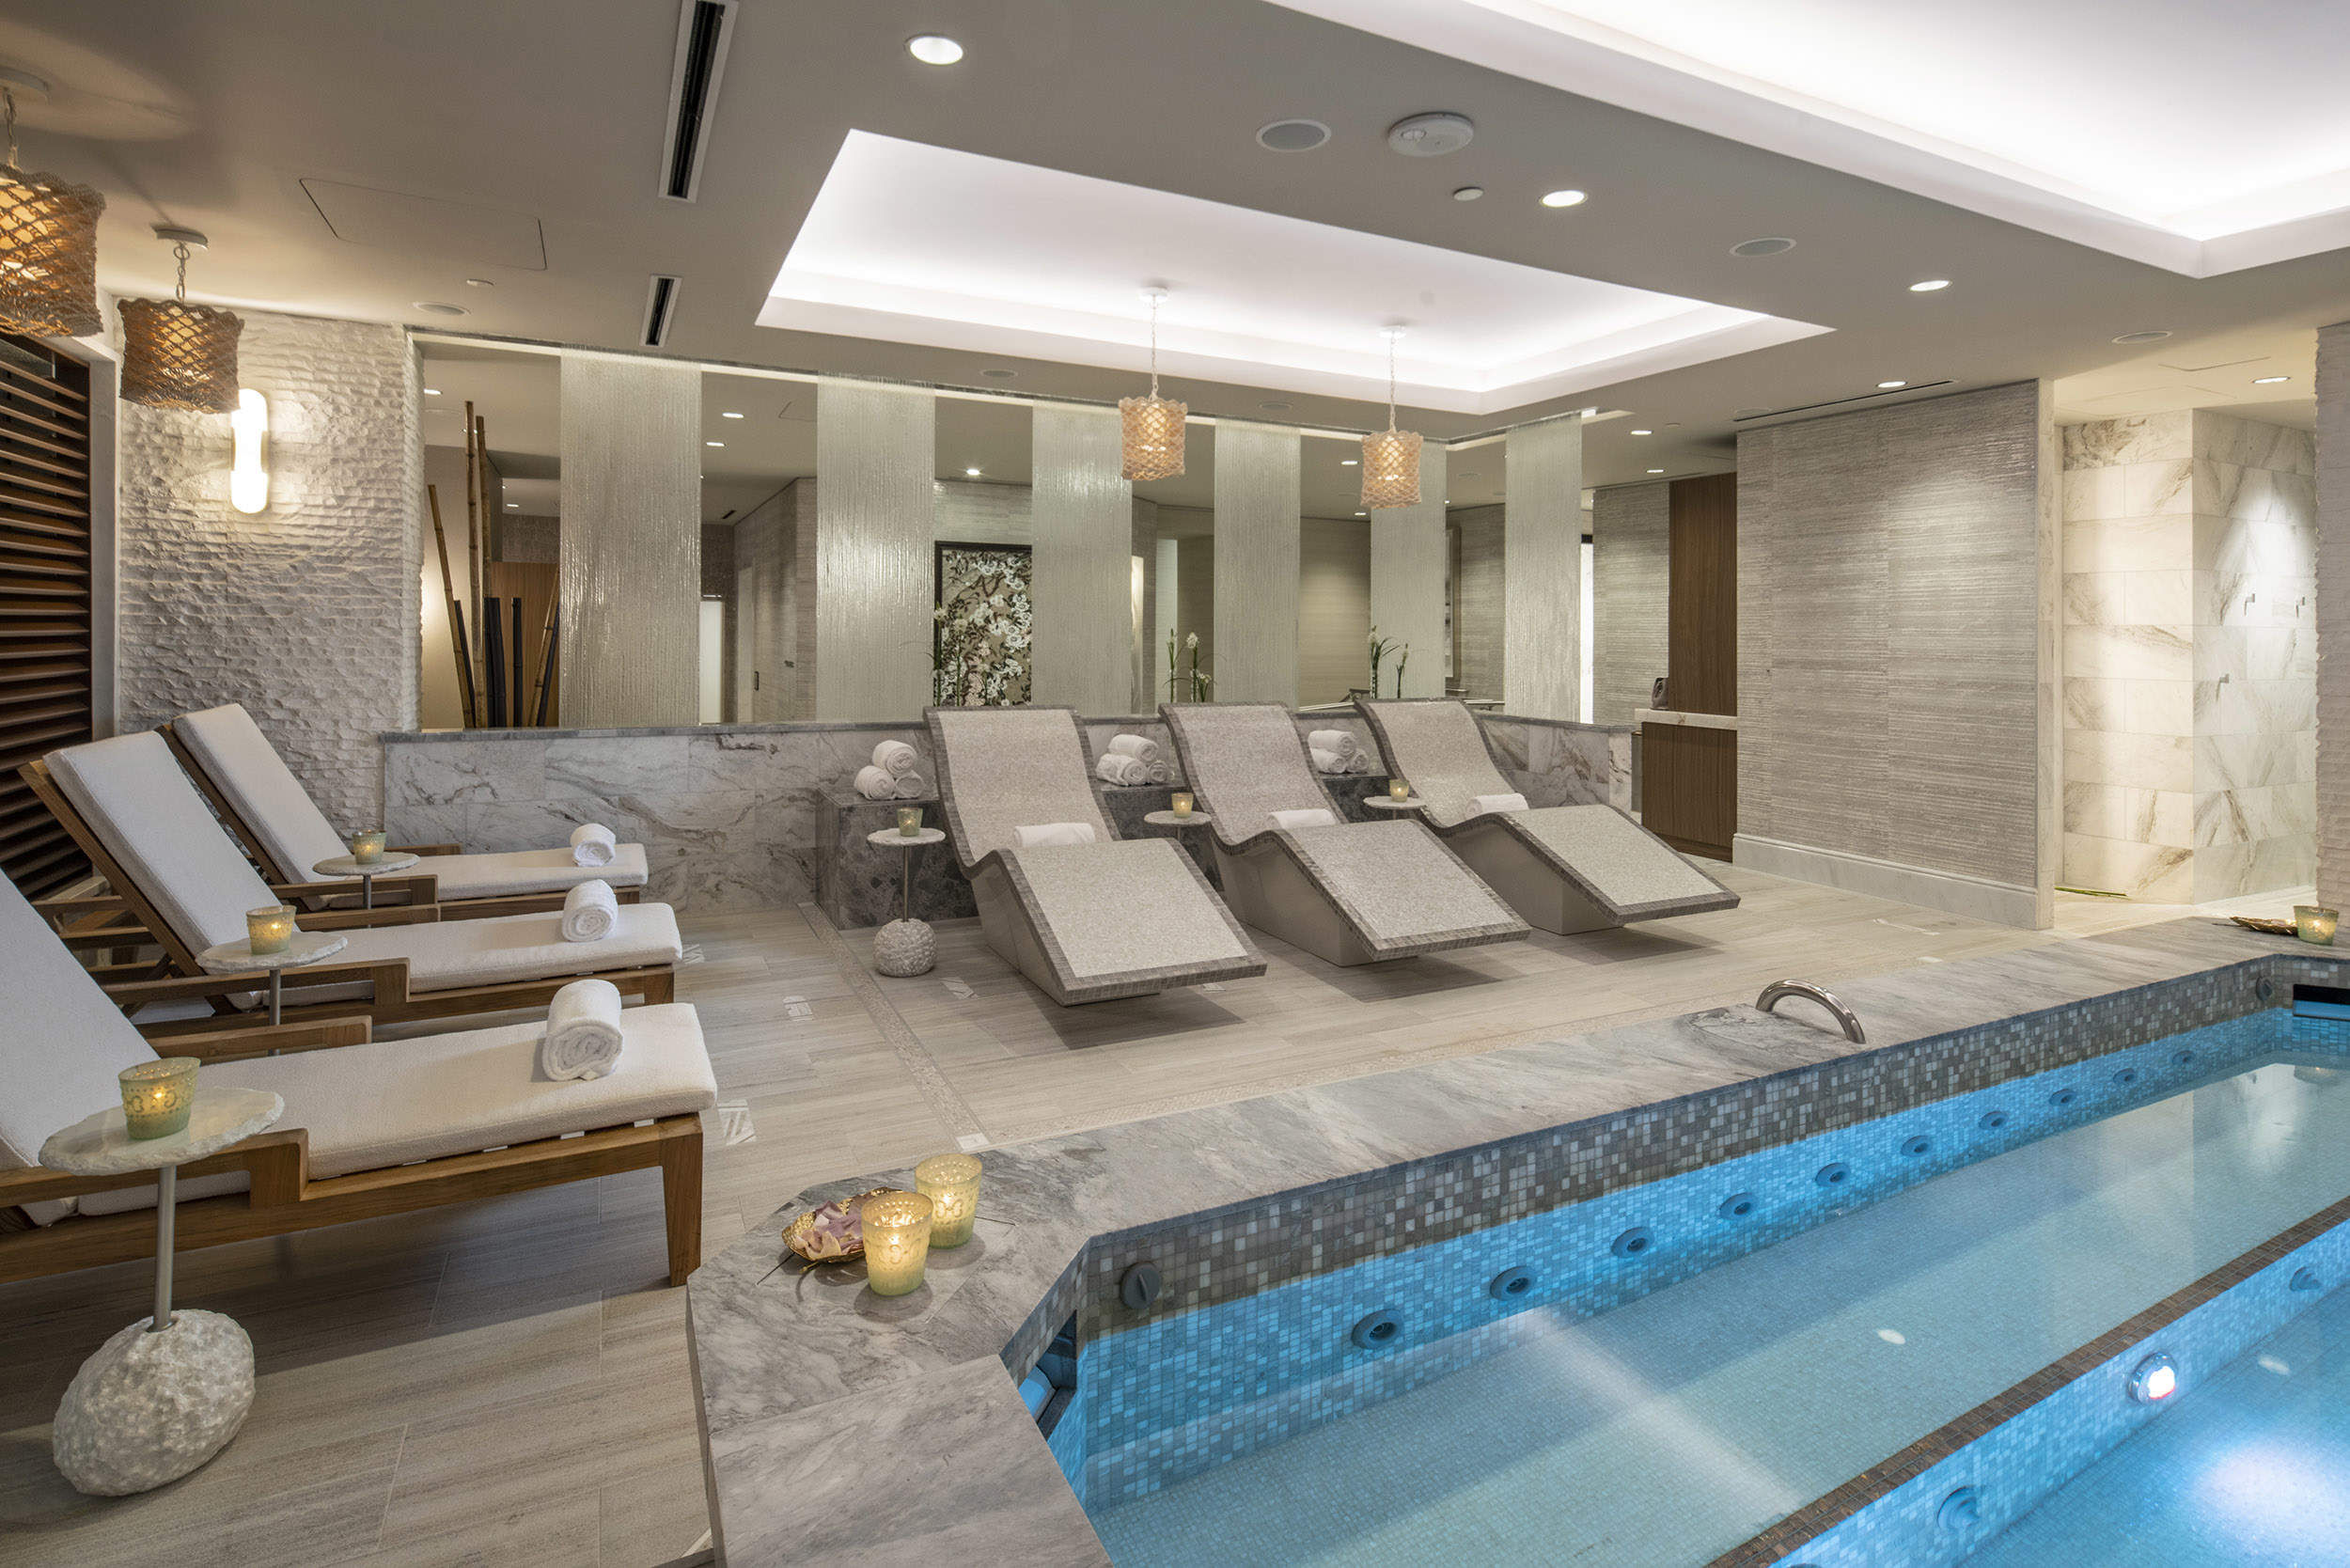 Spa of the Week: The Spa at The Post Oak Hotel at Uptown Houston